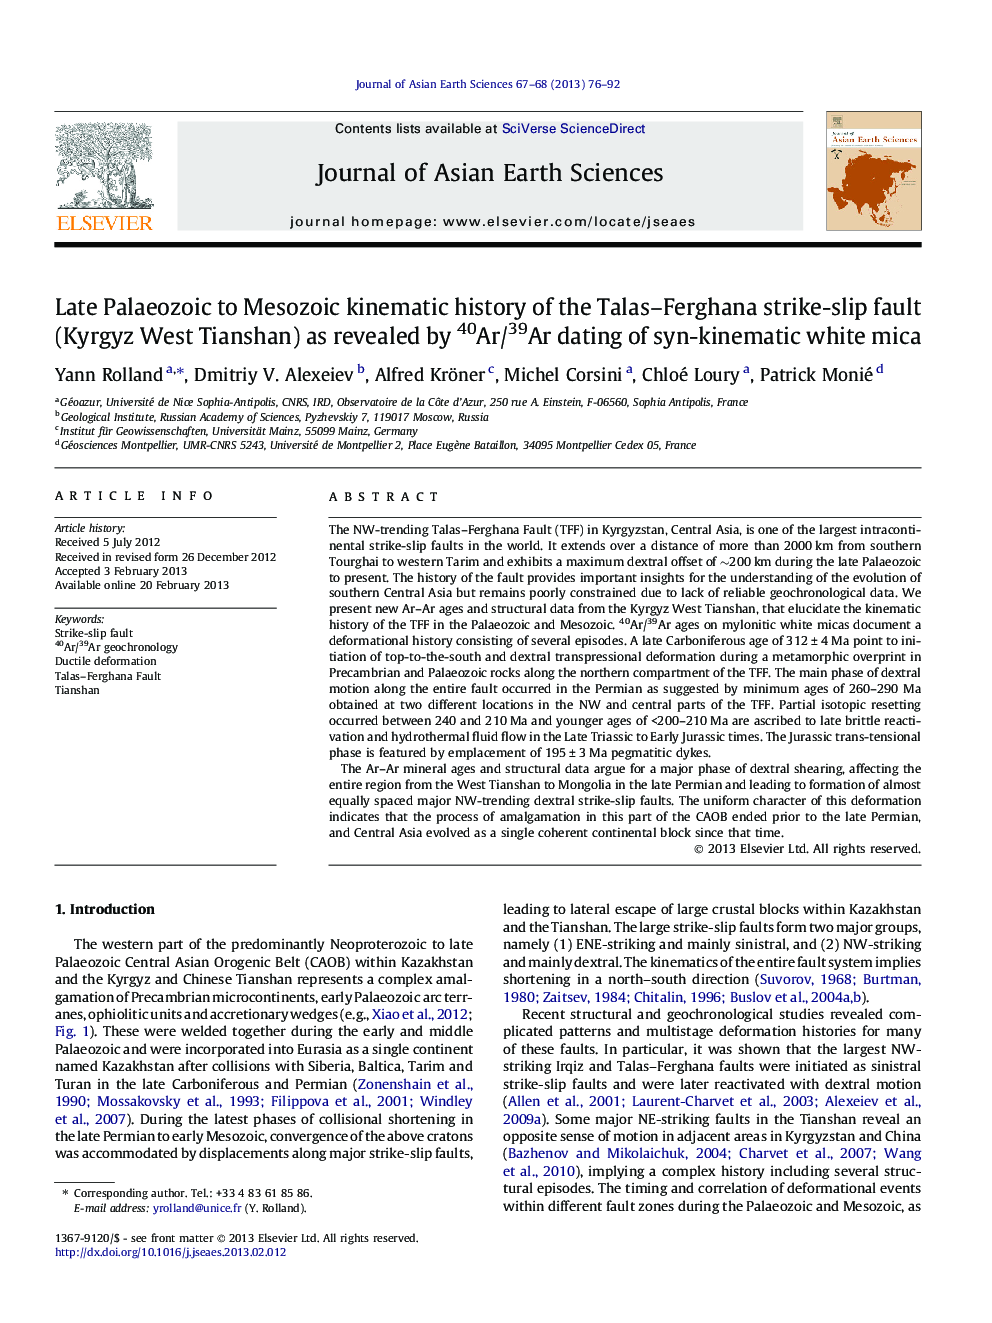 Late Palaeozoic to Mesozoic kinematic history of the Talas-Ferghana strike-slip fault (Kyrgyz West Tianshan) as revealed by 40Ar/39Ar dating of syn-kinematic white mica